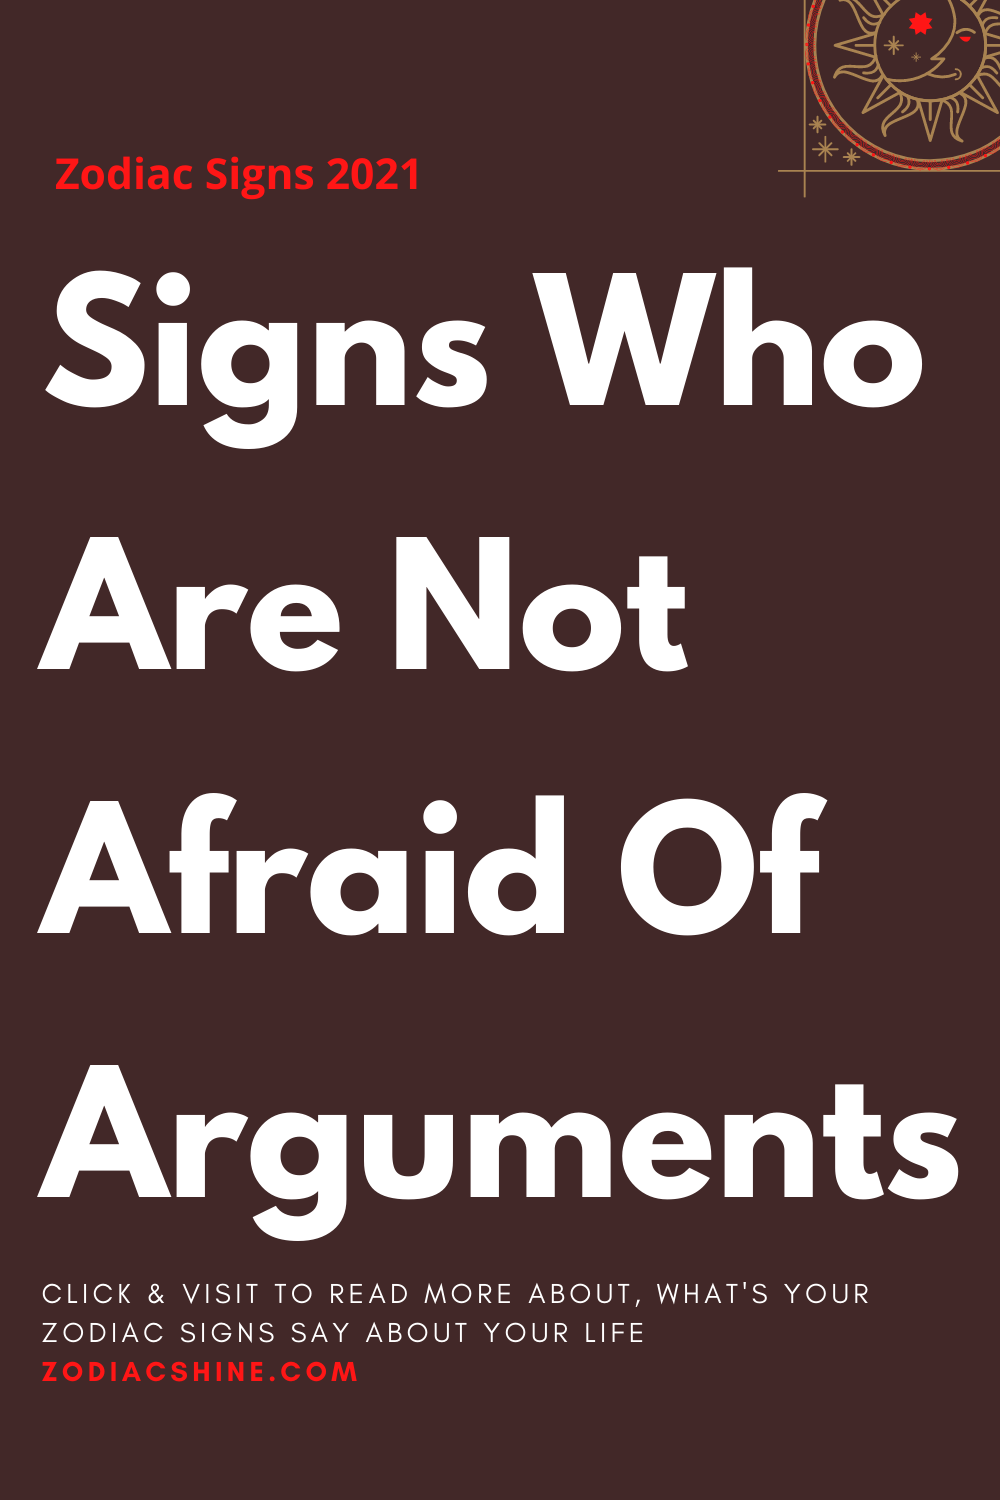 Signs Who Are Not Afraid Of Arguments